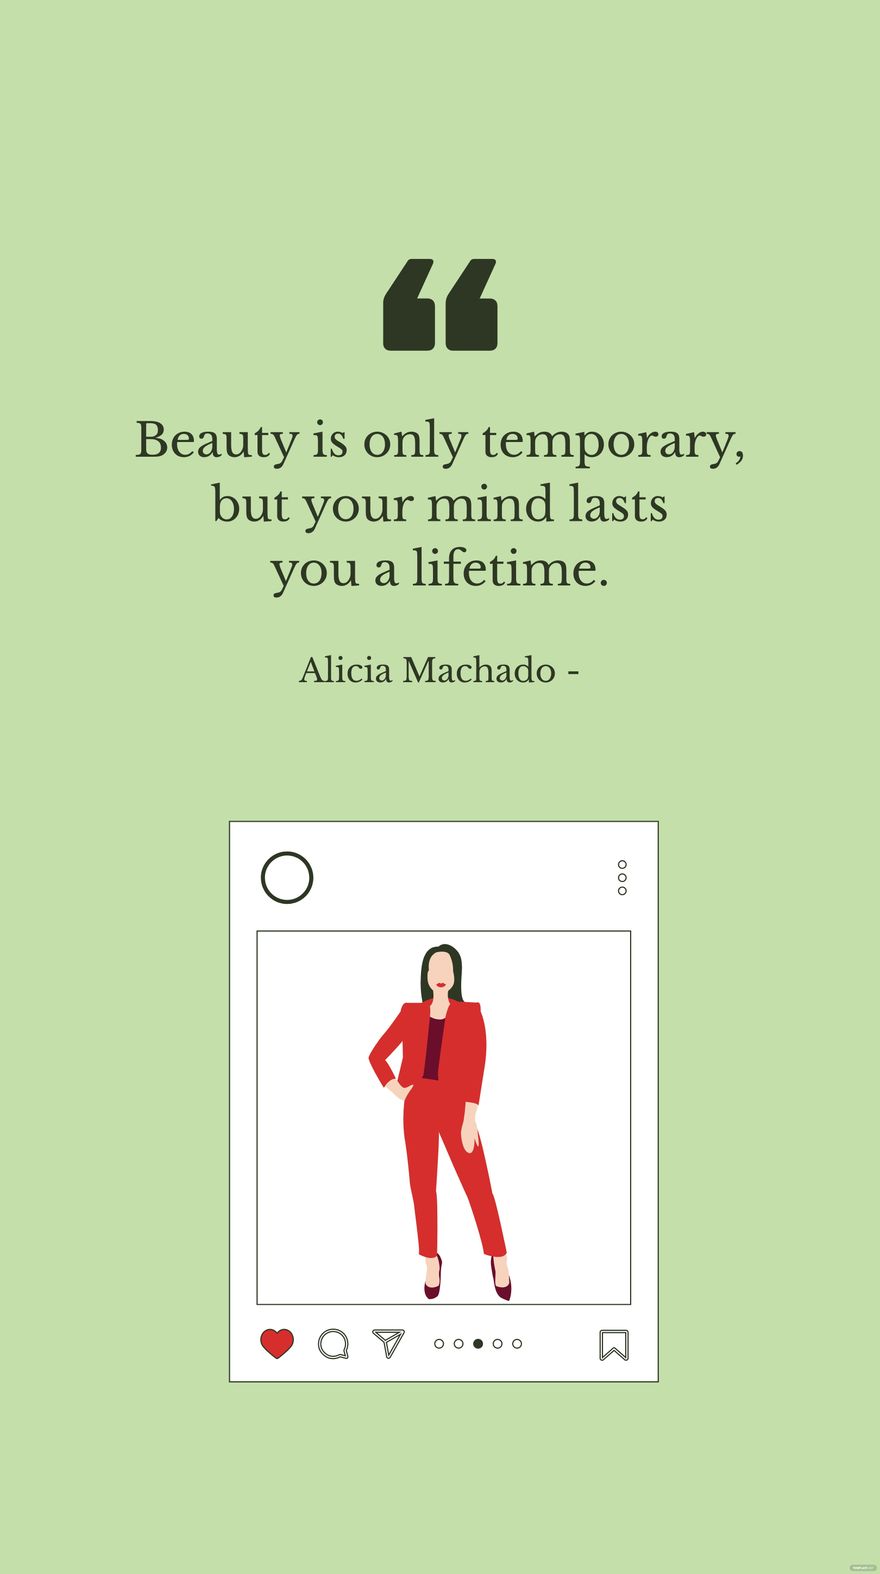 Free Alicia Machado - Beauty is only temporary, but your mind lasts you a lifetime. in JPG